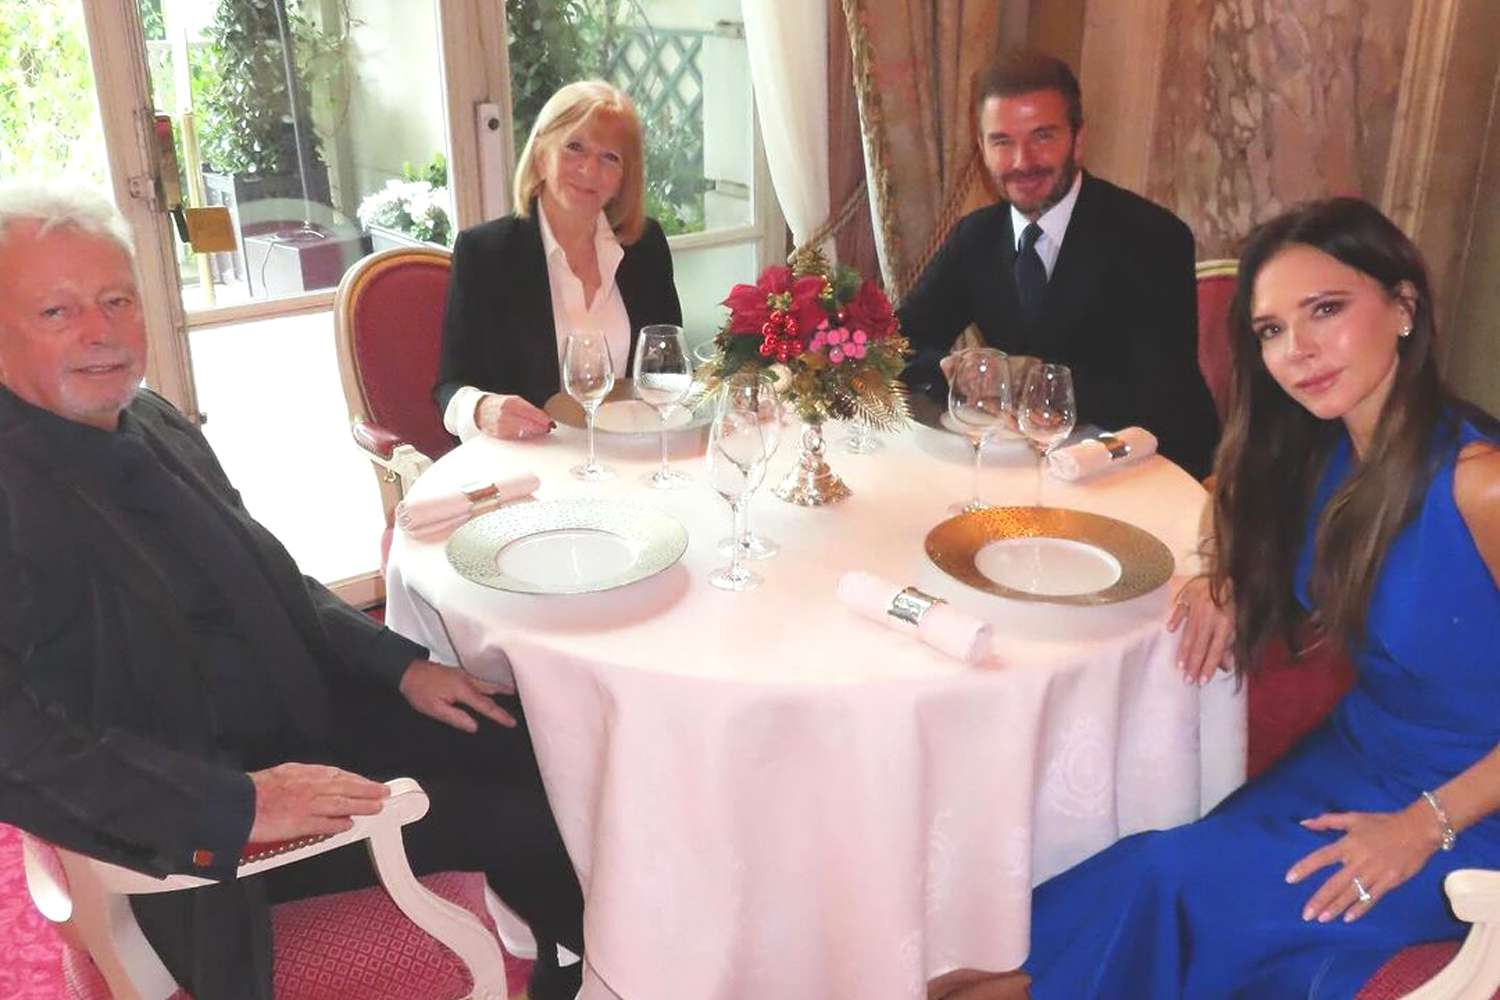 David Beckham Jokes About In-Law Lunch at the Ritz After Wife Victoria Cited 'Working Class' Roots in Documentary